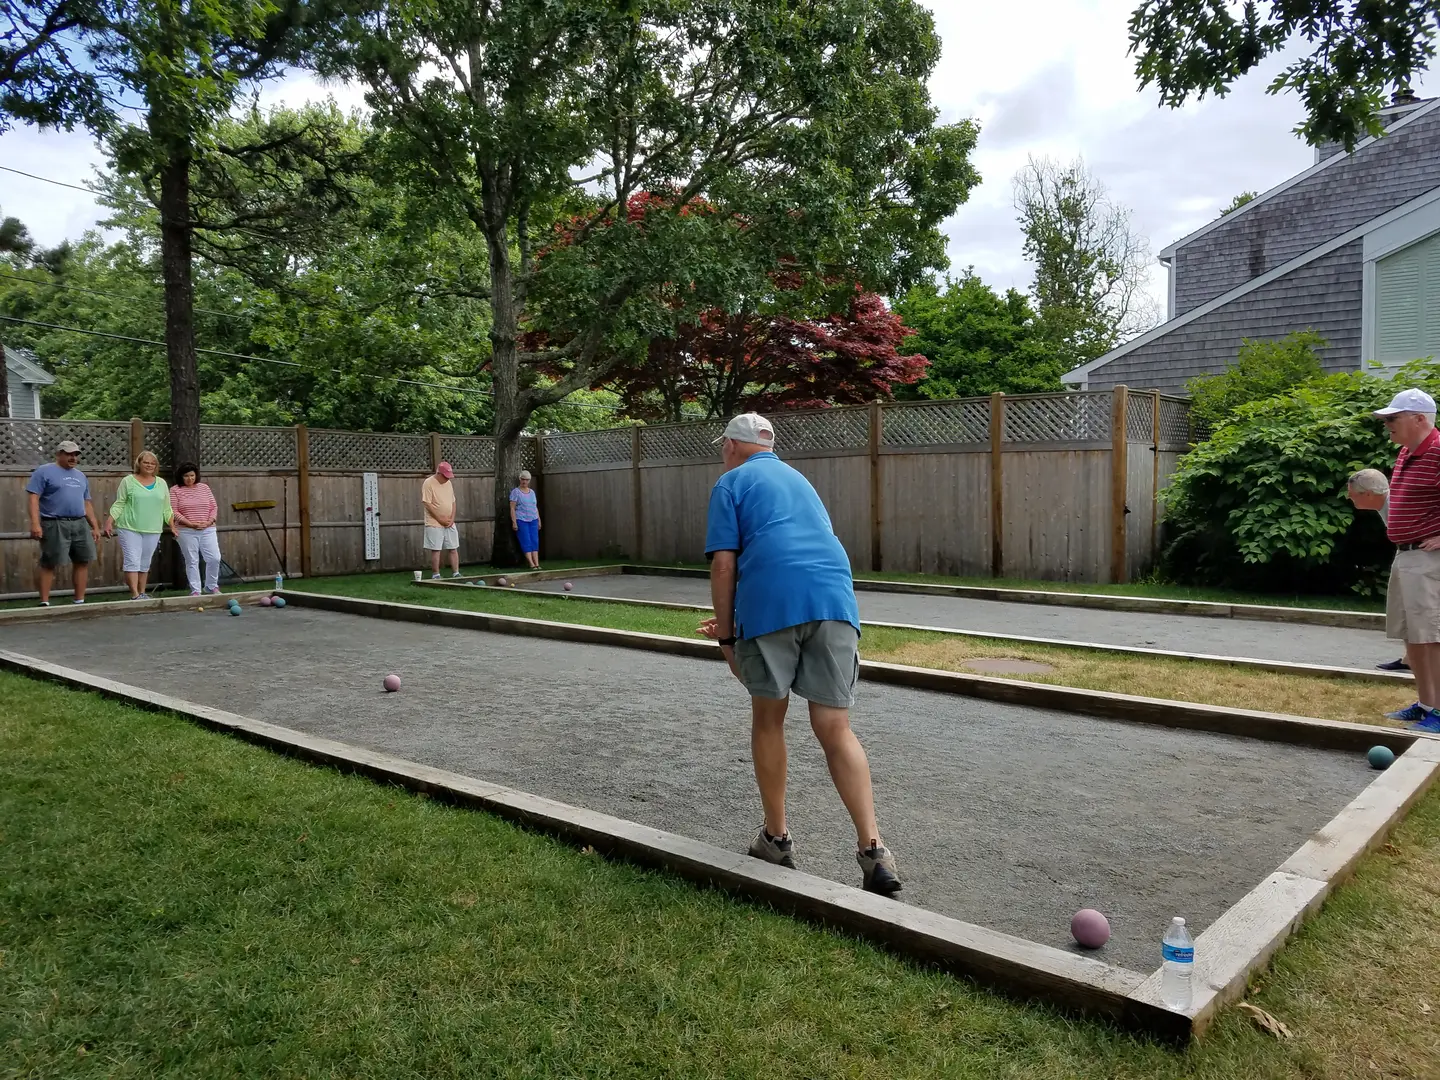 A man playing bocce ball in the backyard.